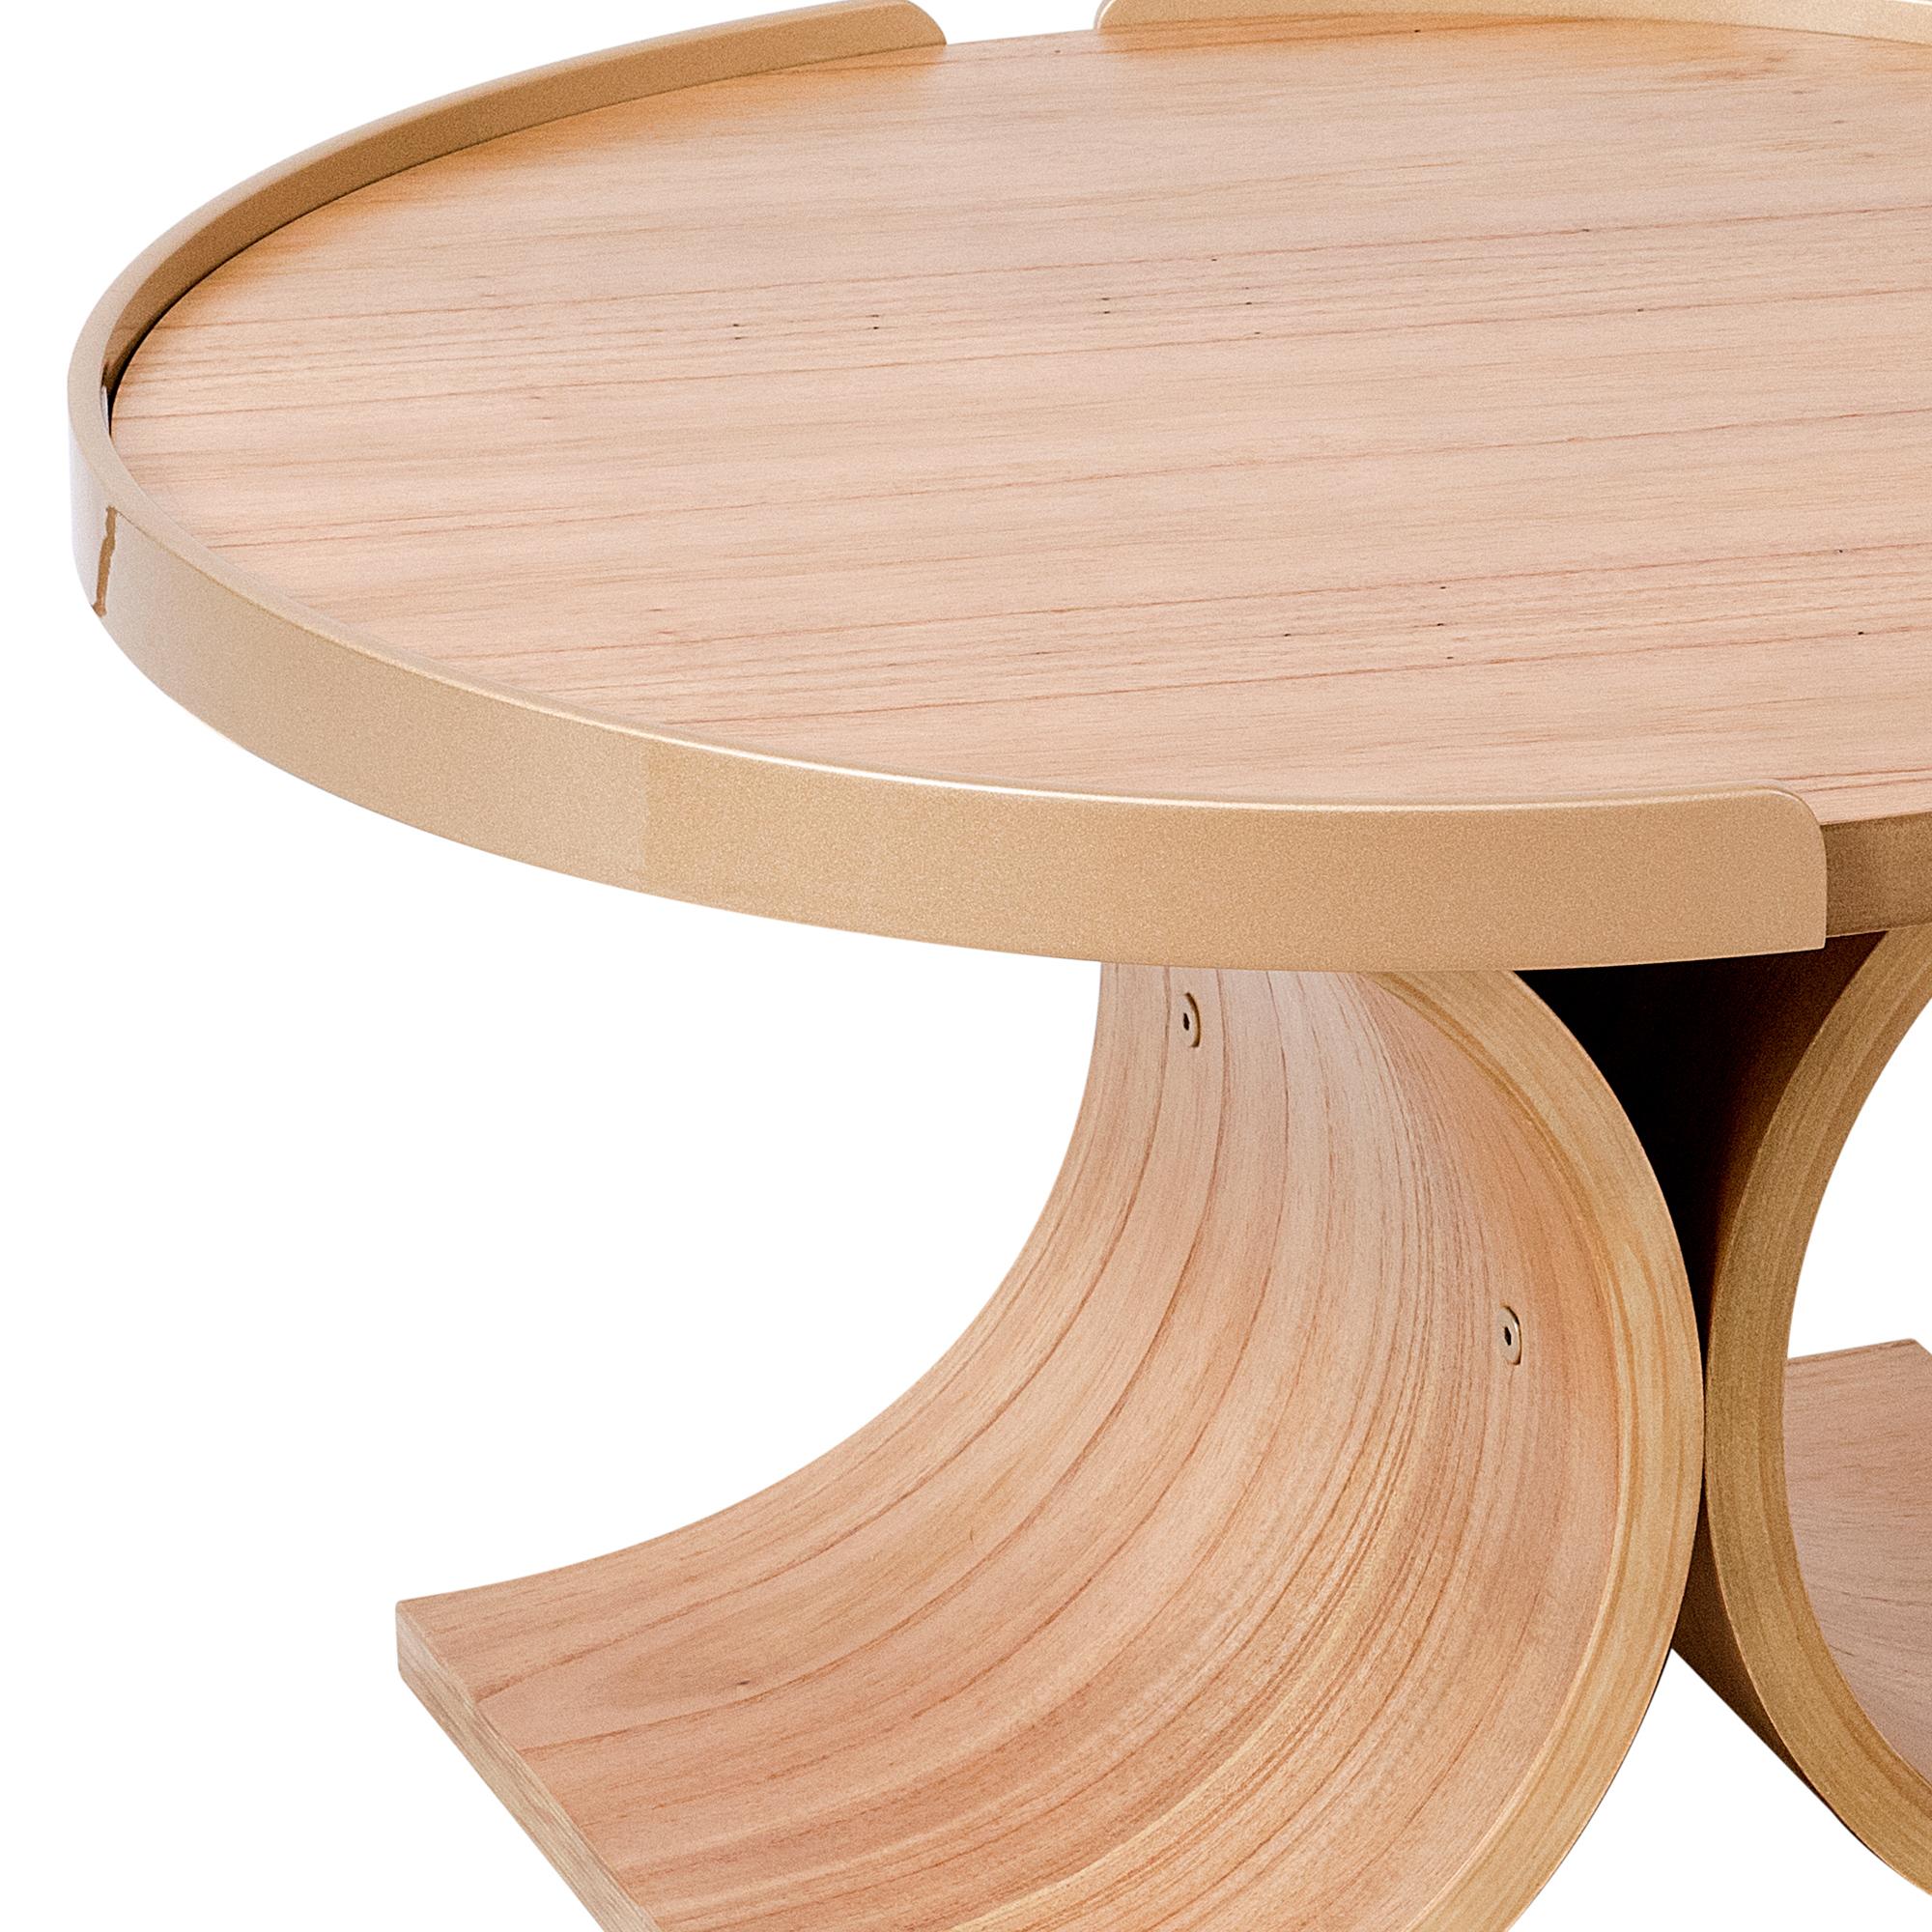 The Regia center table has a base made of a curved cinnamon natural wood multi-laminate. (20mm thick)
The top is made of the same wood and finish, cinnamon.  In the edges there are two semi circles made of carbon steel painted with matte gold